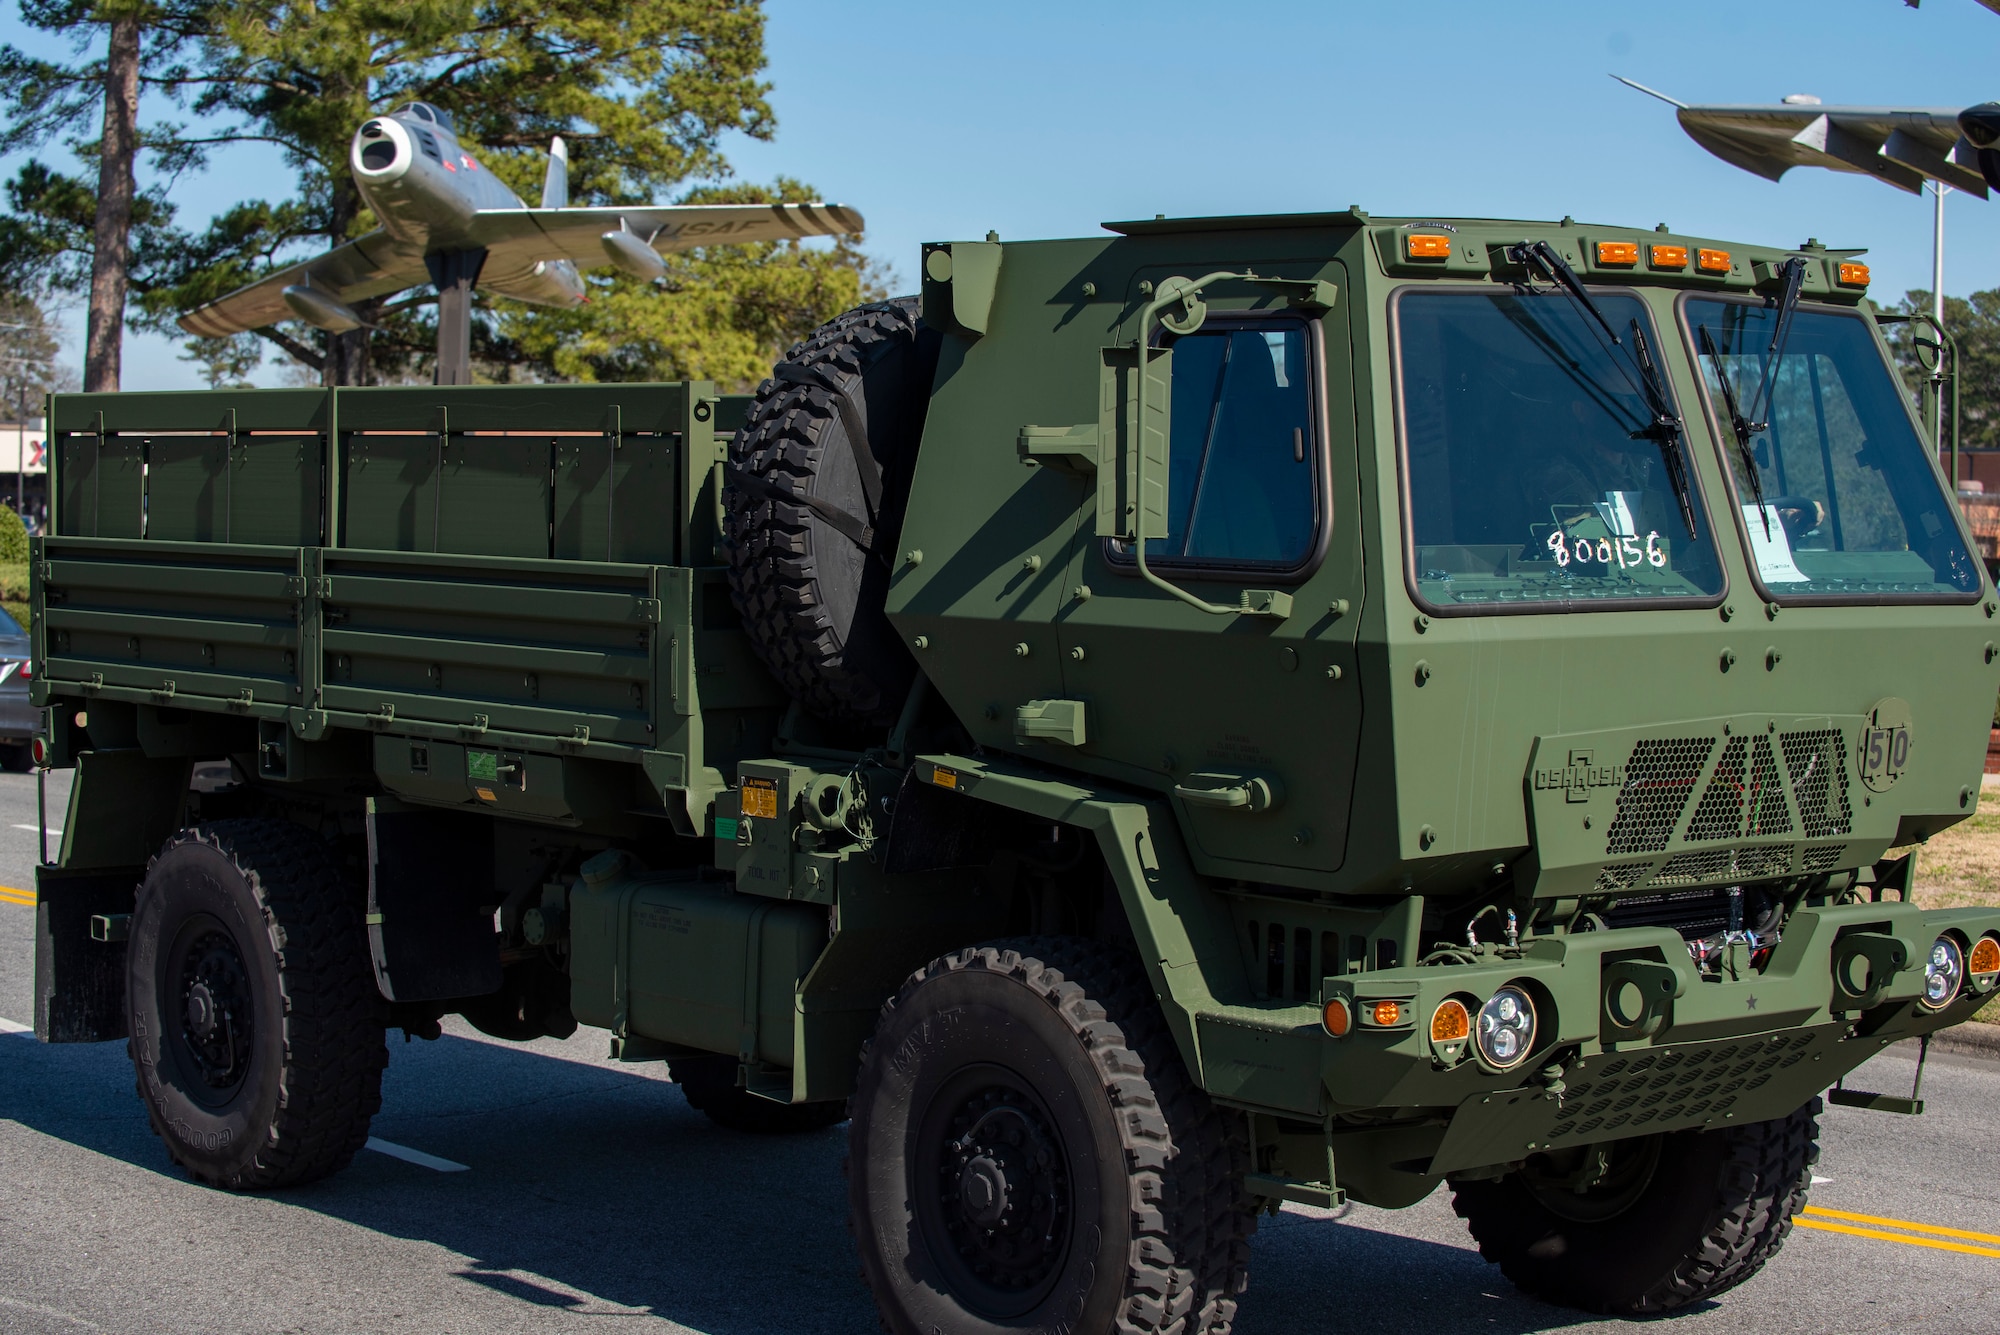 An M1078 light medium tactical vehicle drives down the street during a Vehicle Inspection Roll-By competition at Seymour Johnson Air Force Base, North Carolina, March 8, 2021.